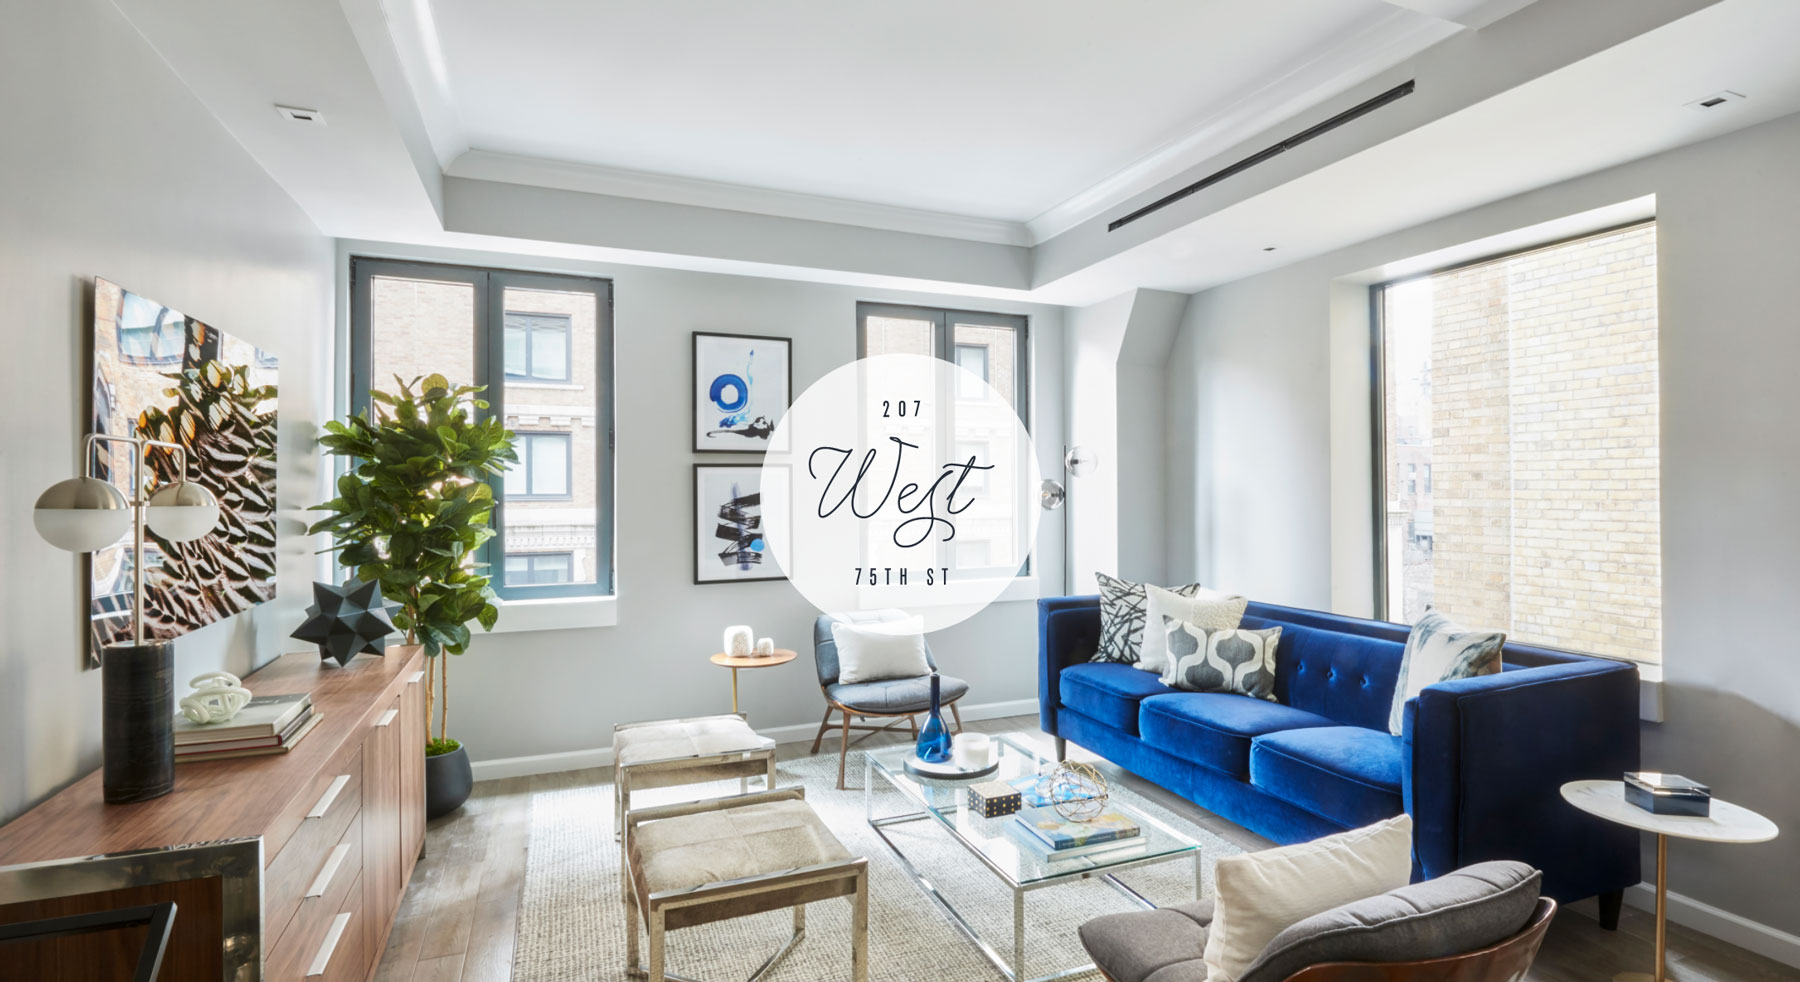 207 West 75th Street color palette consisting of navy blue, light blue, white, and supporting shades of grey.